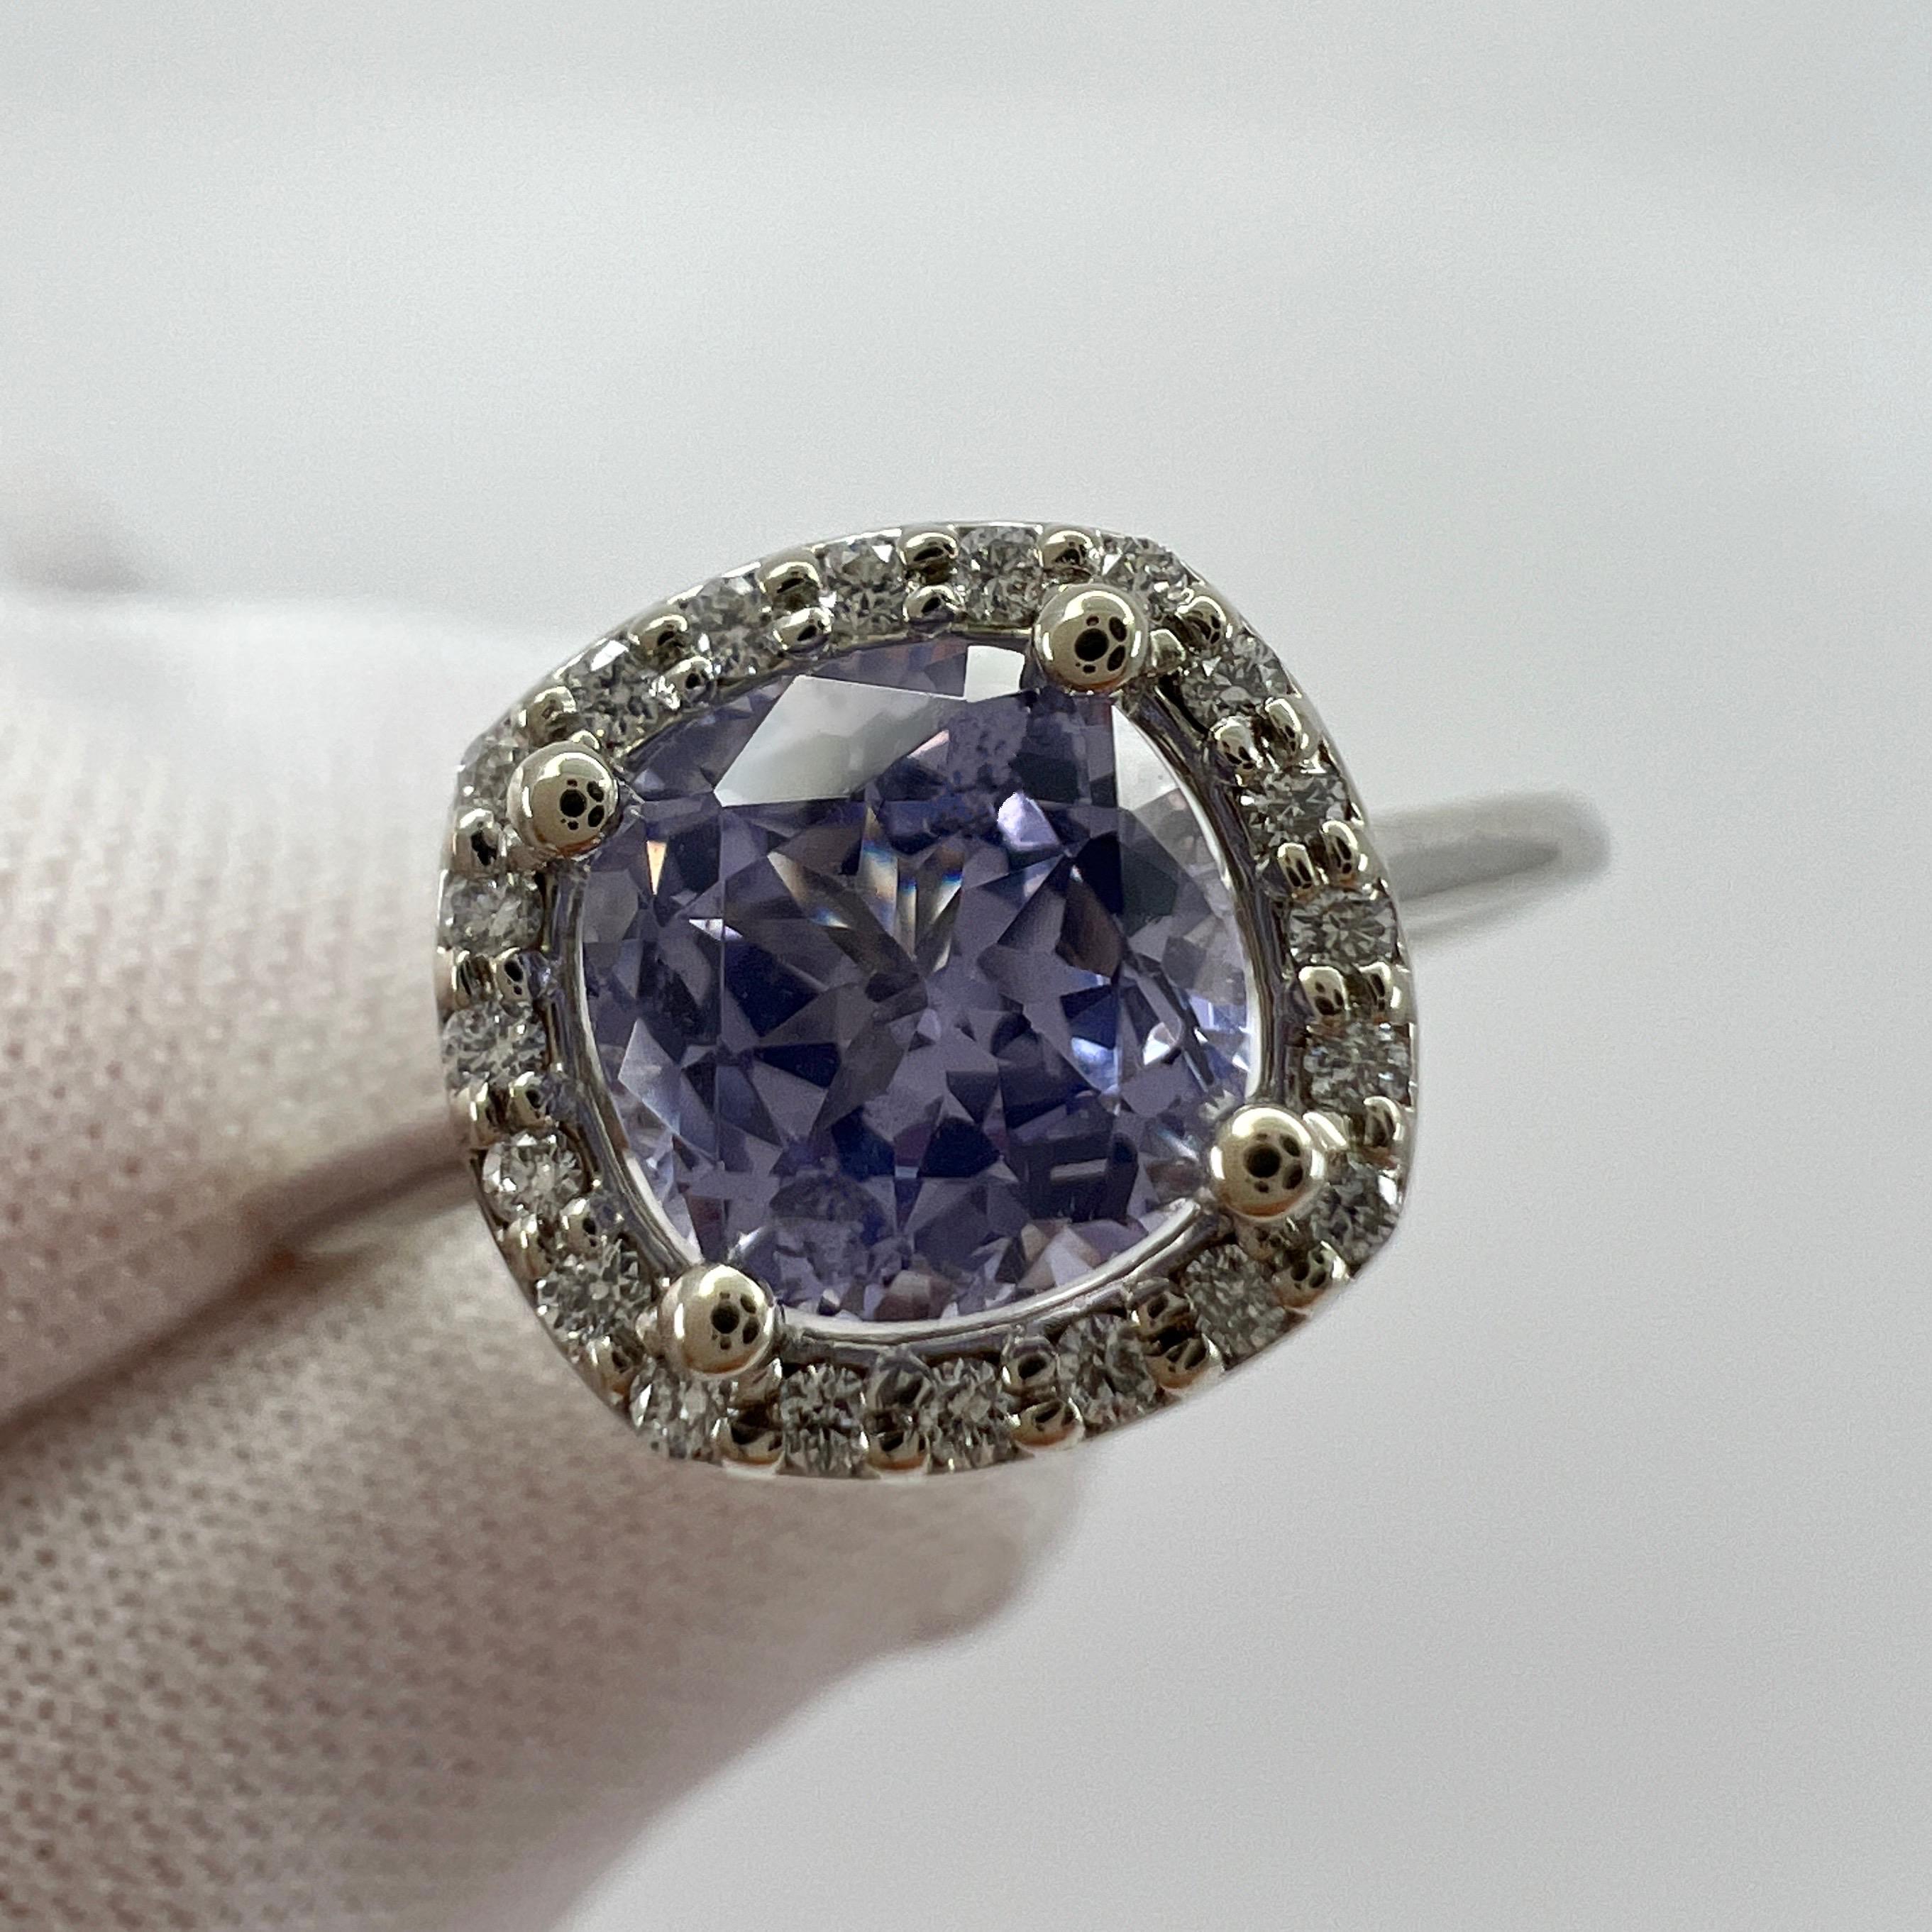 1.02ct Vivid Lilac Purple Spinel & Diamond 18k White Gold Cushion Cut Halo Ring For Sale 6